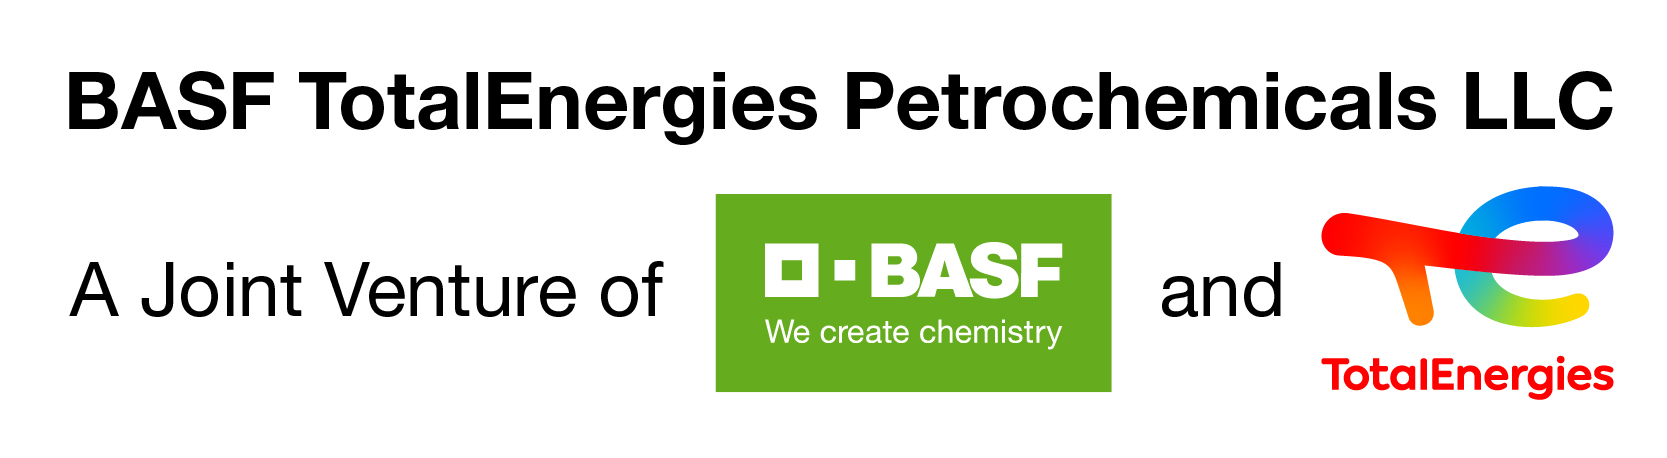 BASF TotalEnergies Petrochemicals LLC, A Joint Venture of BASF and TotalEnergies